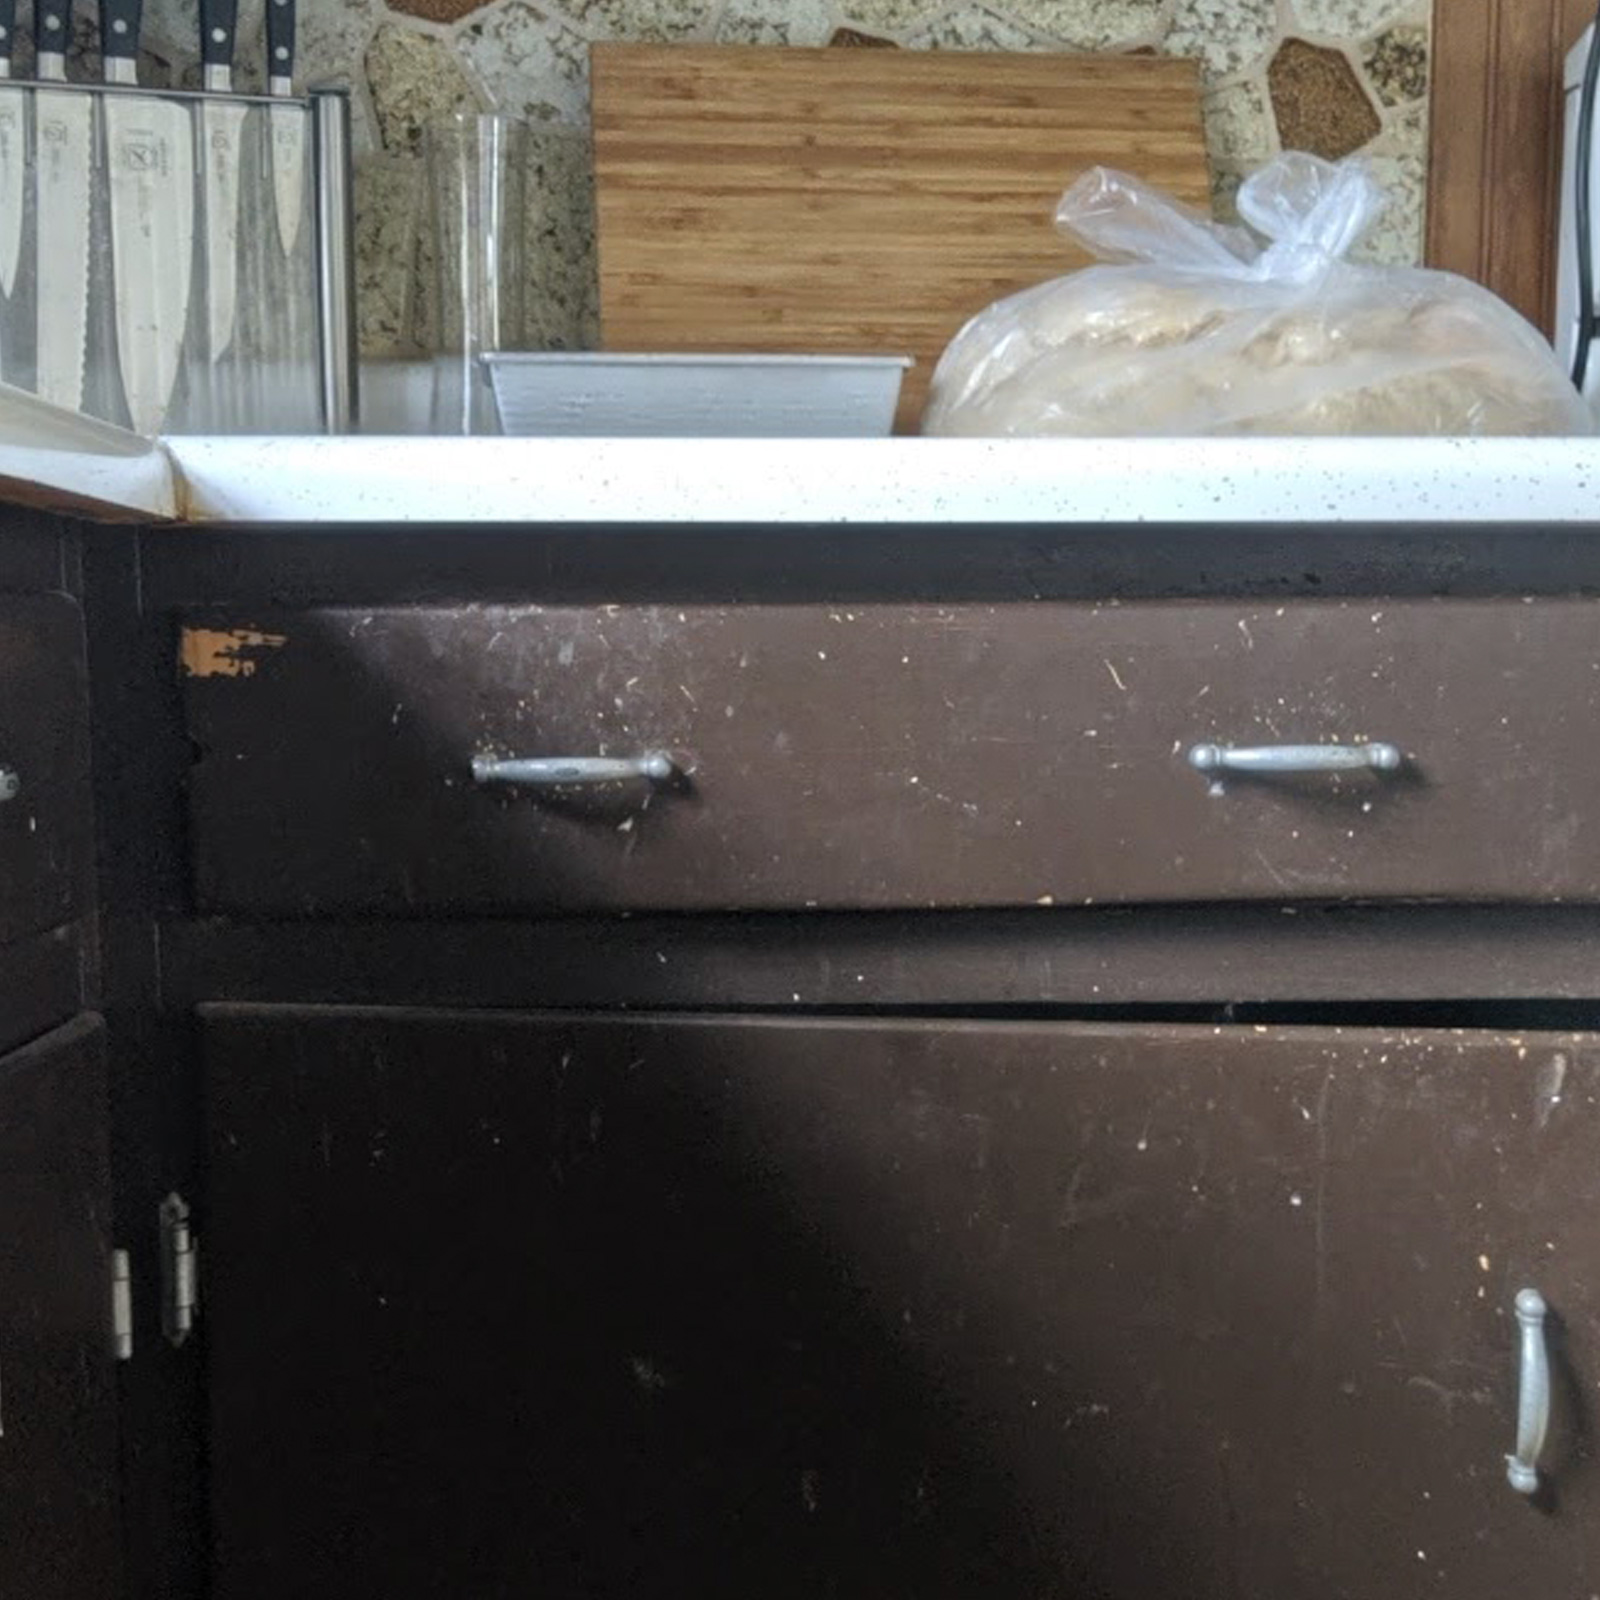 Entry 141 - Over used cabinets have made this kitchen unsightly